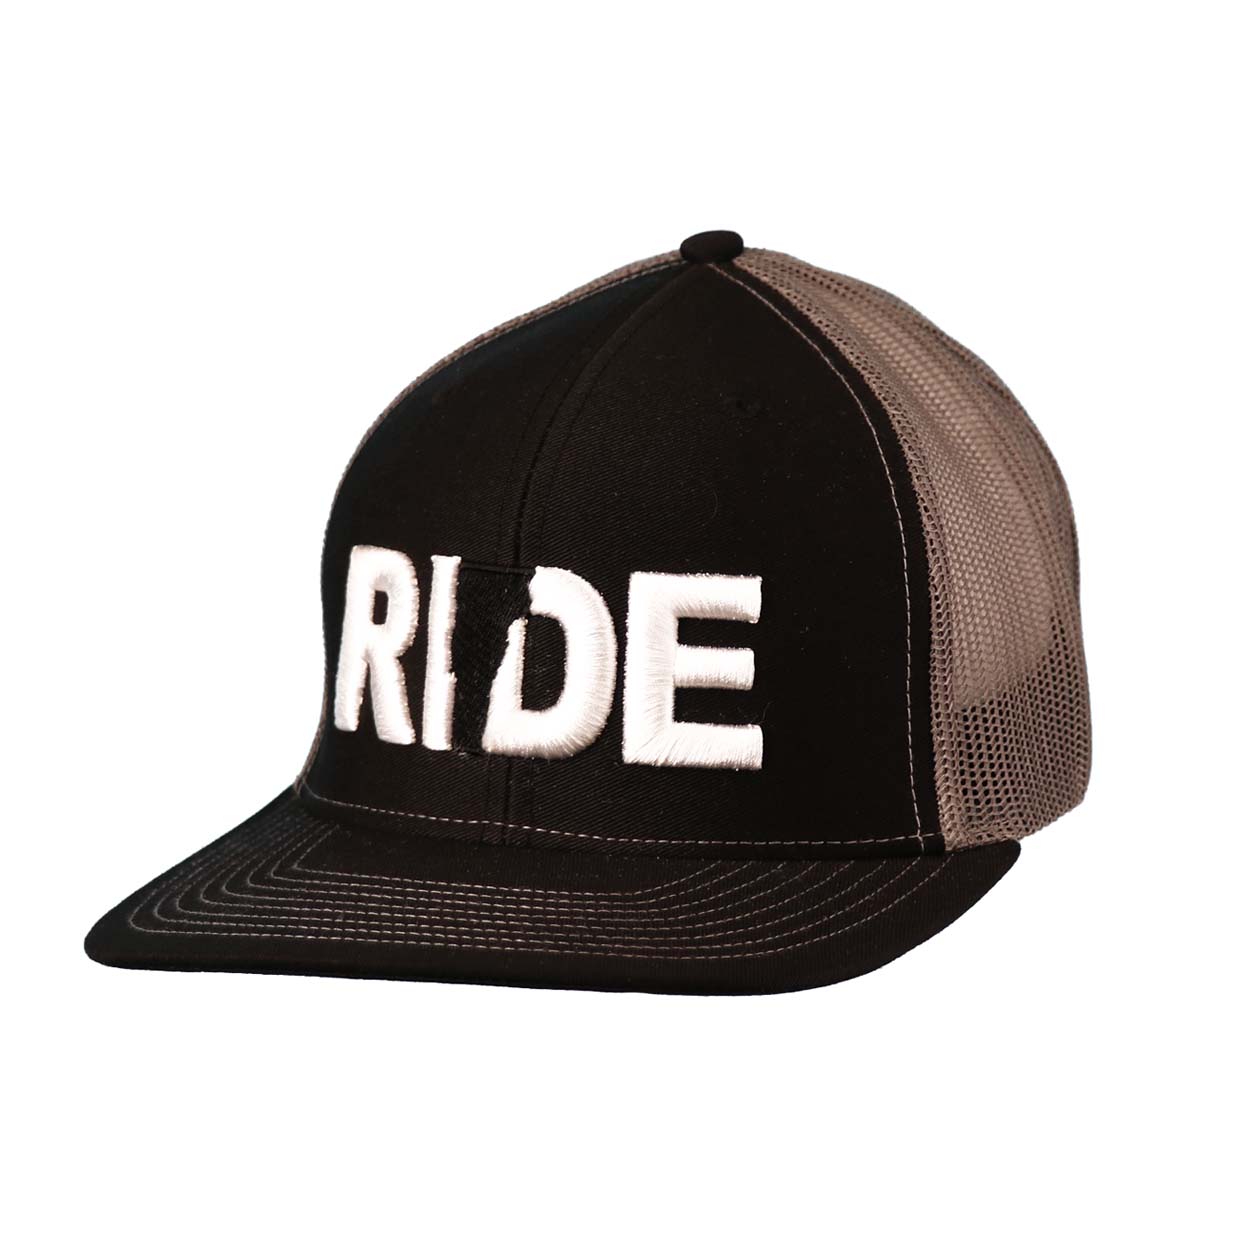 Ride Vermont Classic Embroidered Snapback Trucker Hat Black/Gray